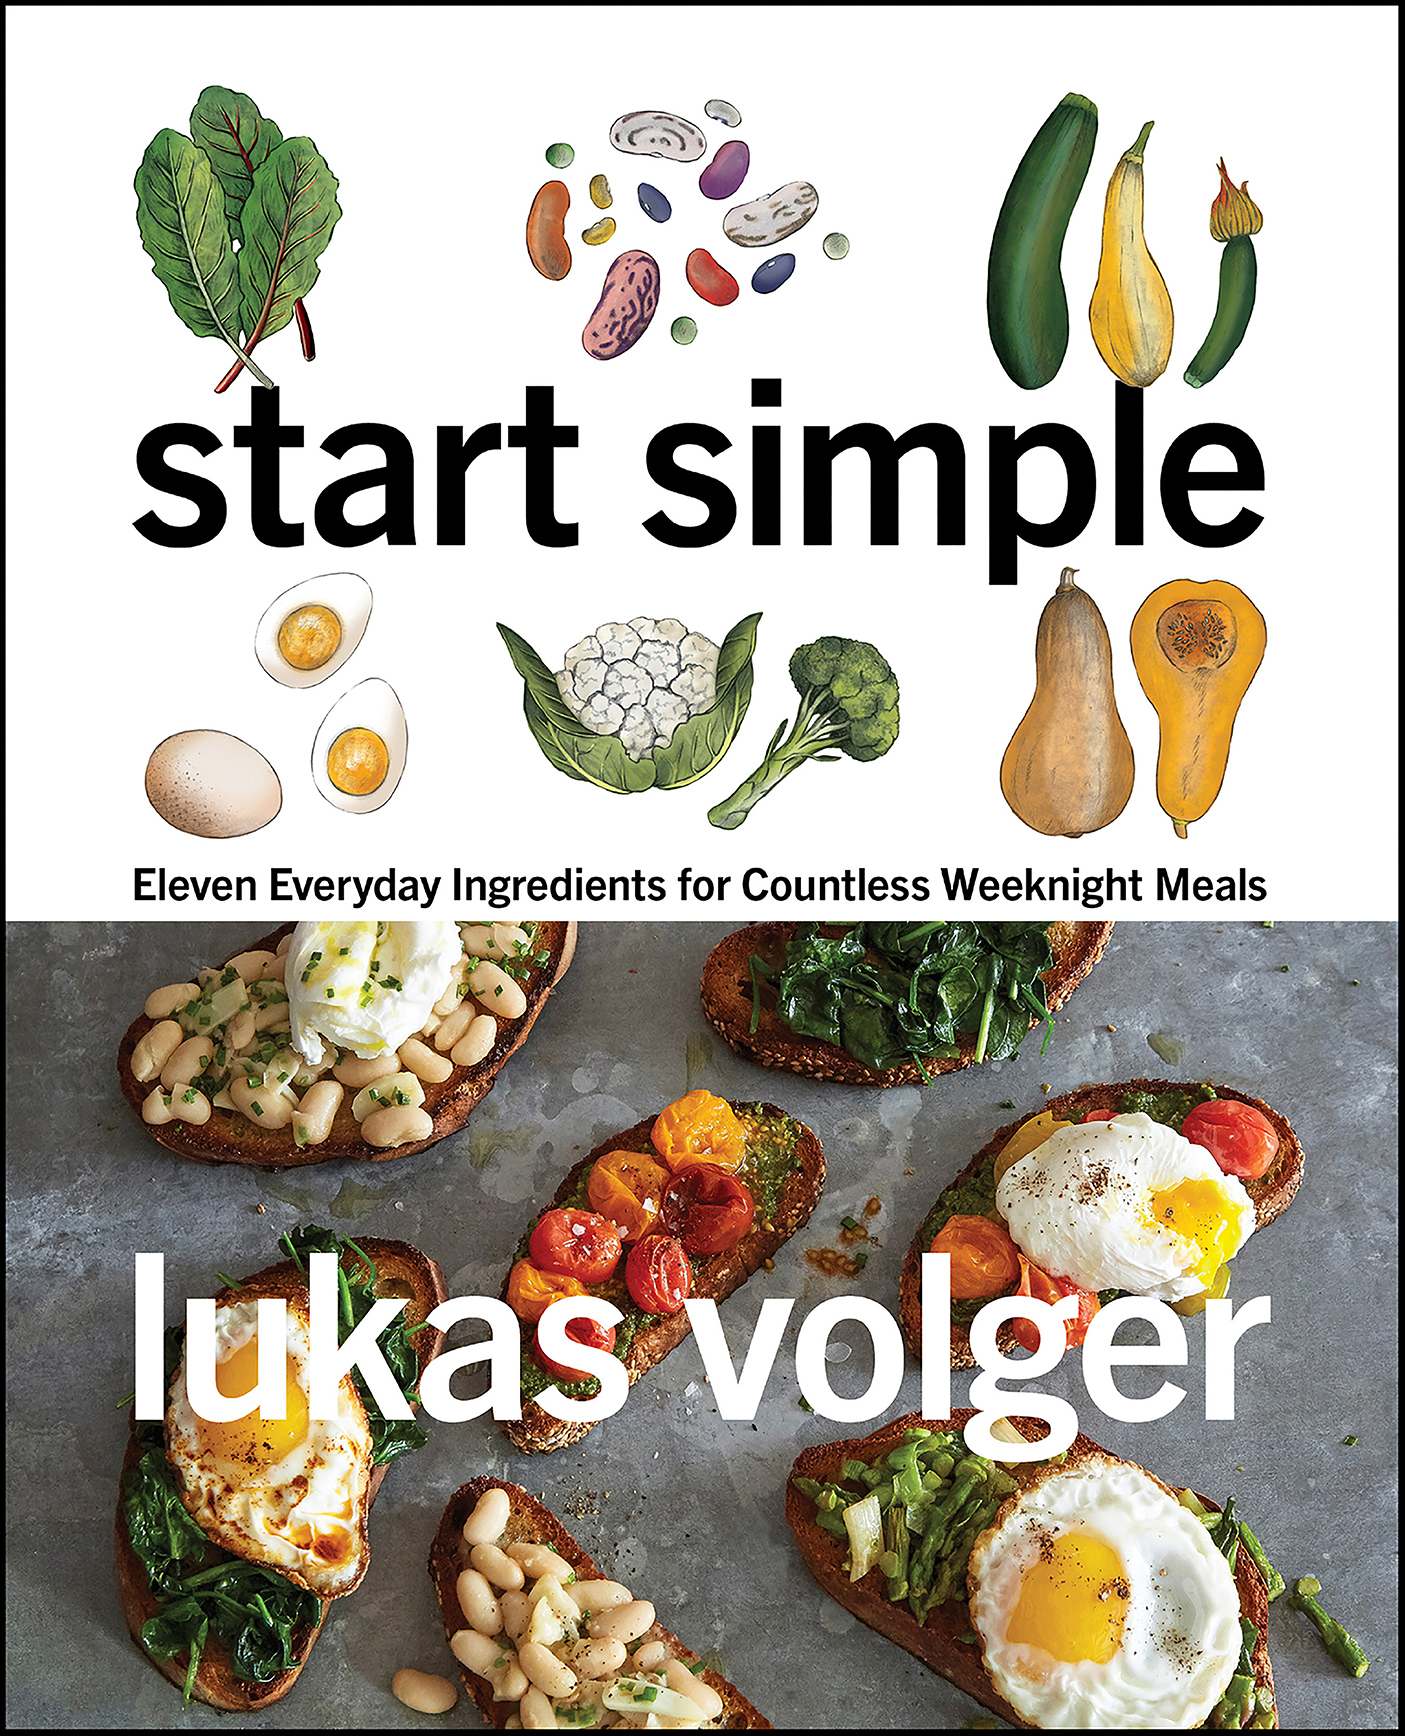 Start simple eleven everyday ingredients for countless weeknight meals cover image